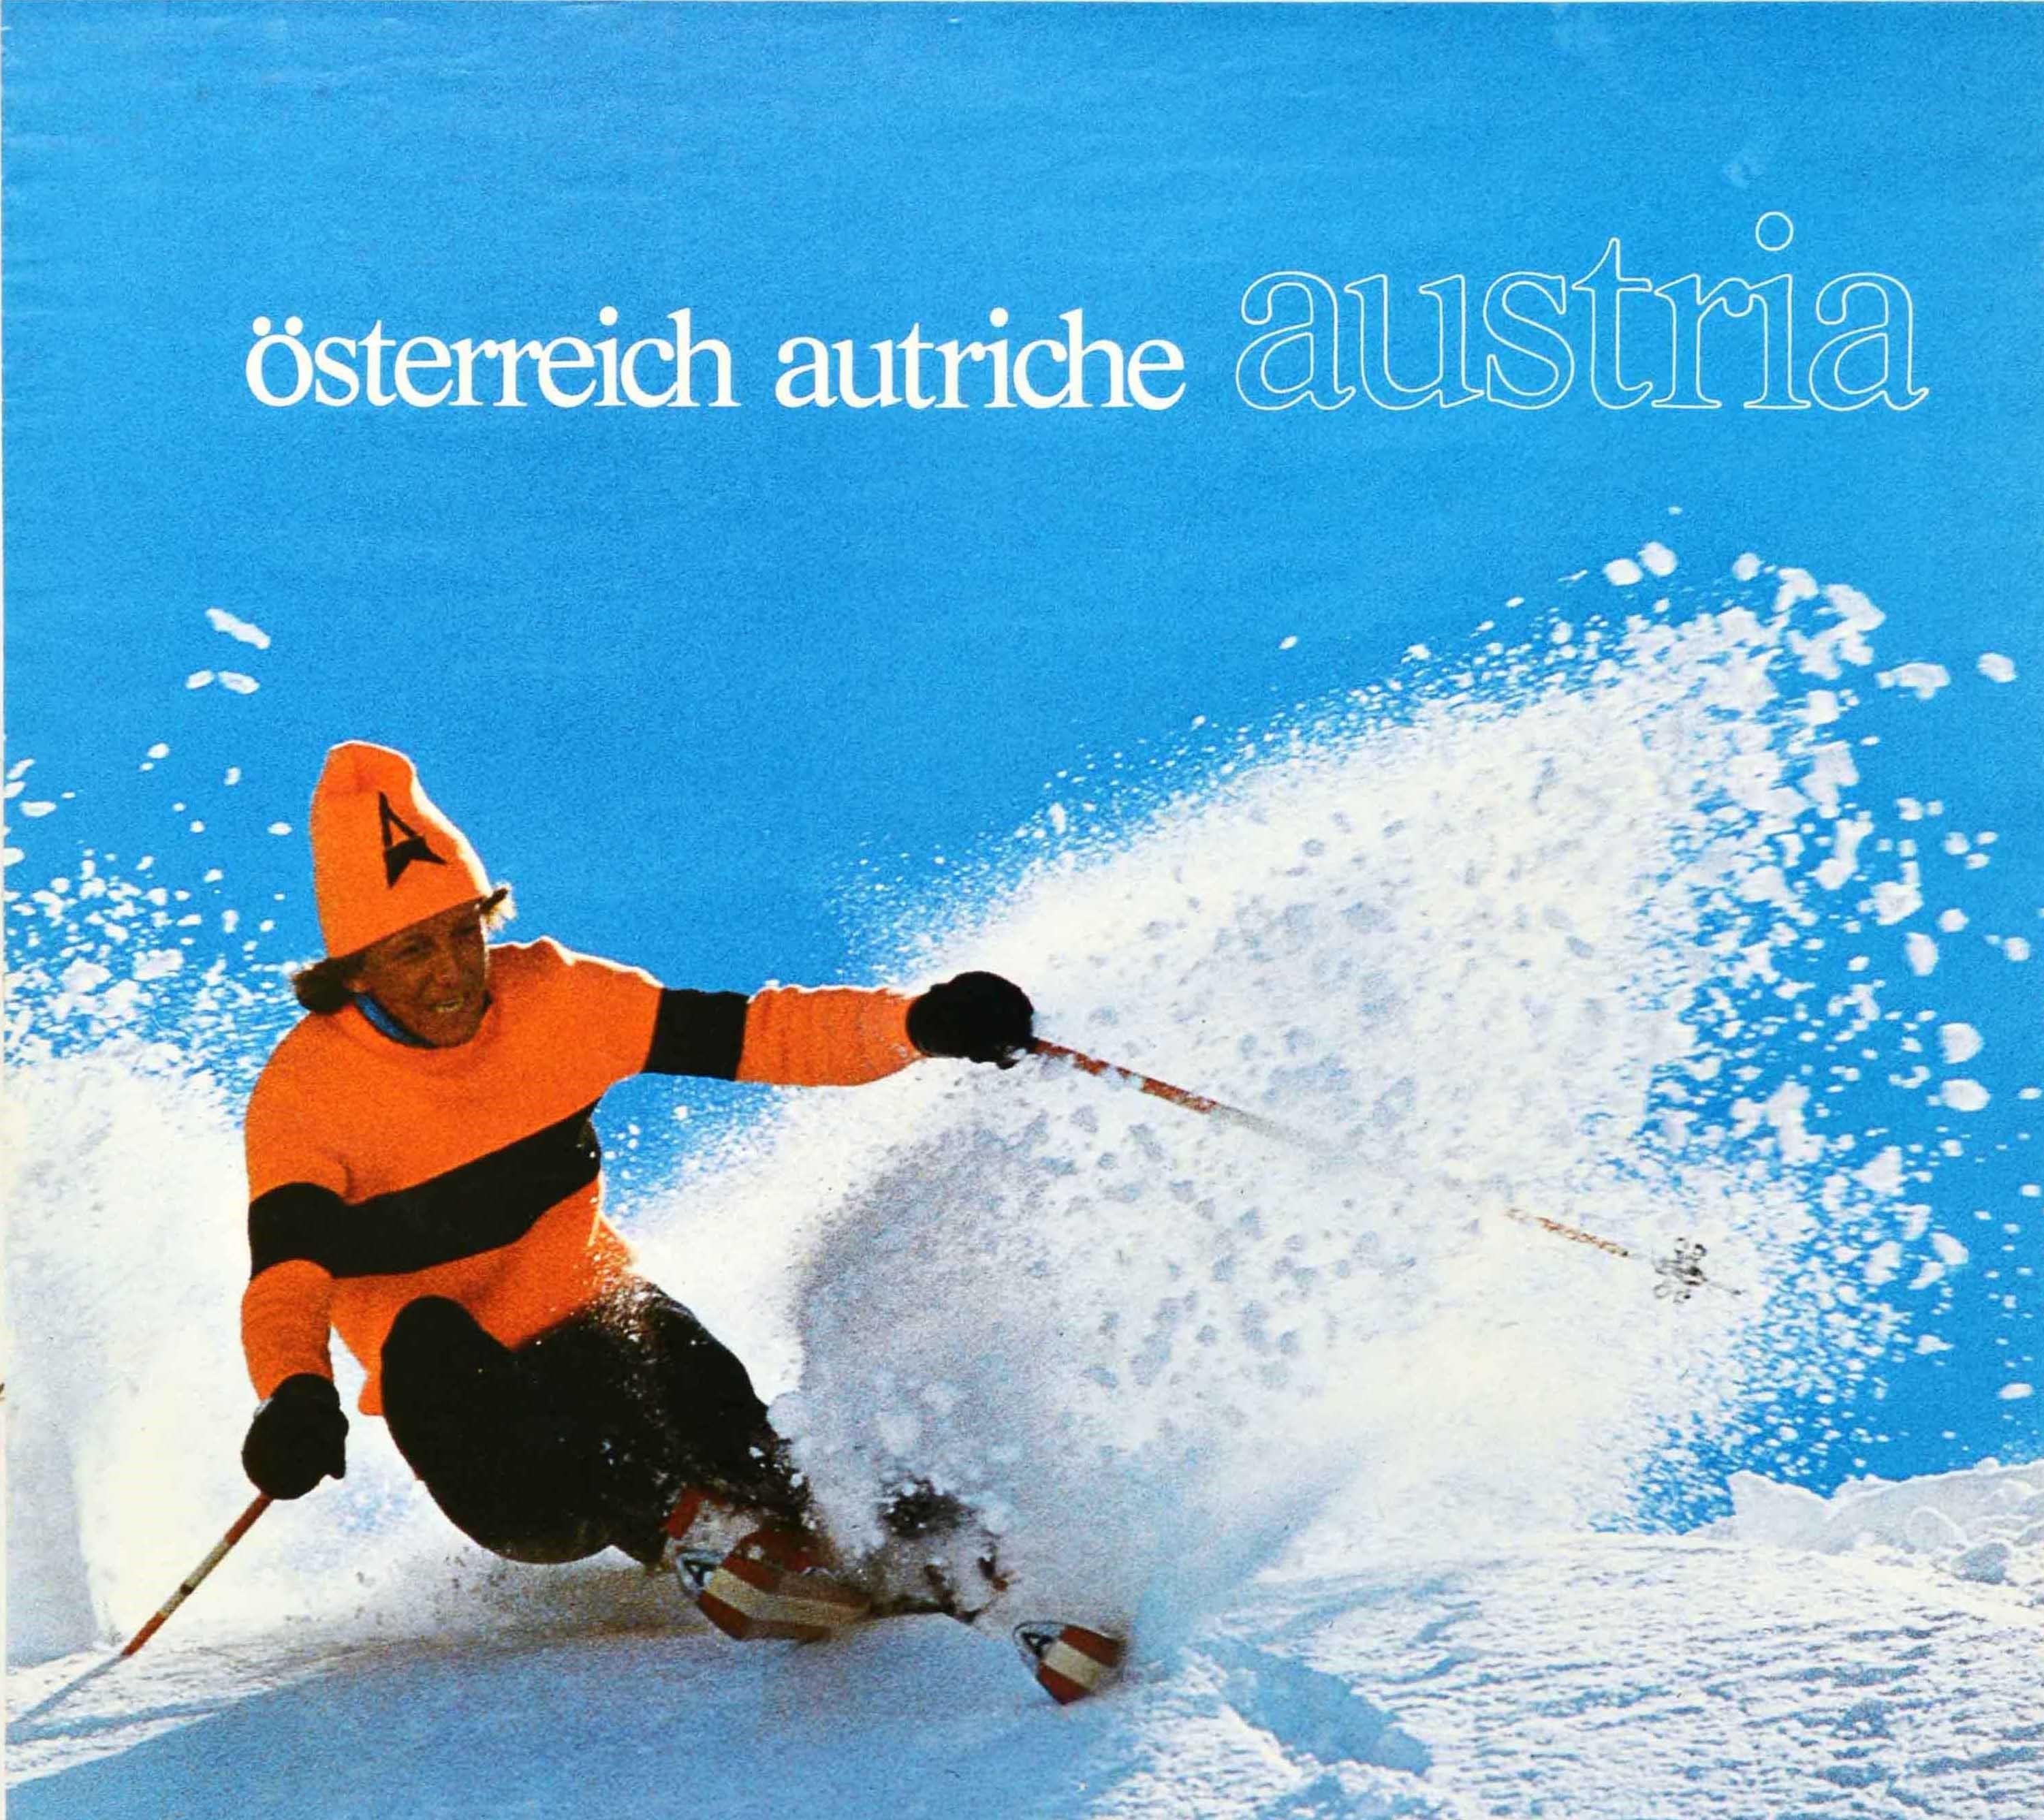 Original vintage winter sport travel poster for Osterreich Autriche Austria depicting a lady skiing down a snowy mountain at speed in the sunshine with the bold white text on the blue sky above. Published by Osterreichische Fremdenverkehrswerbung,